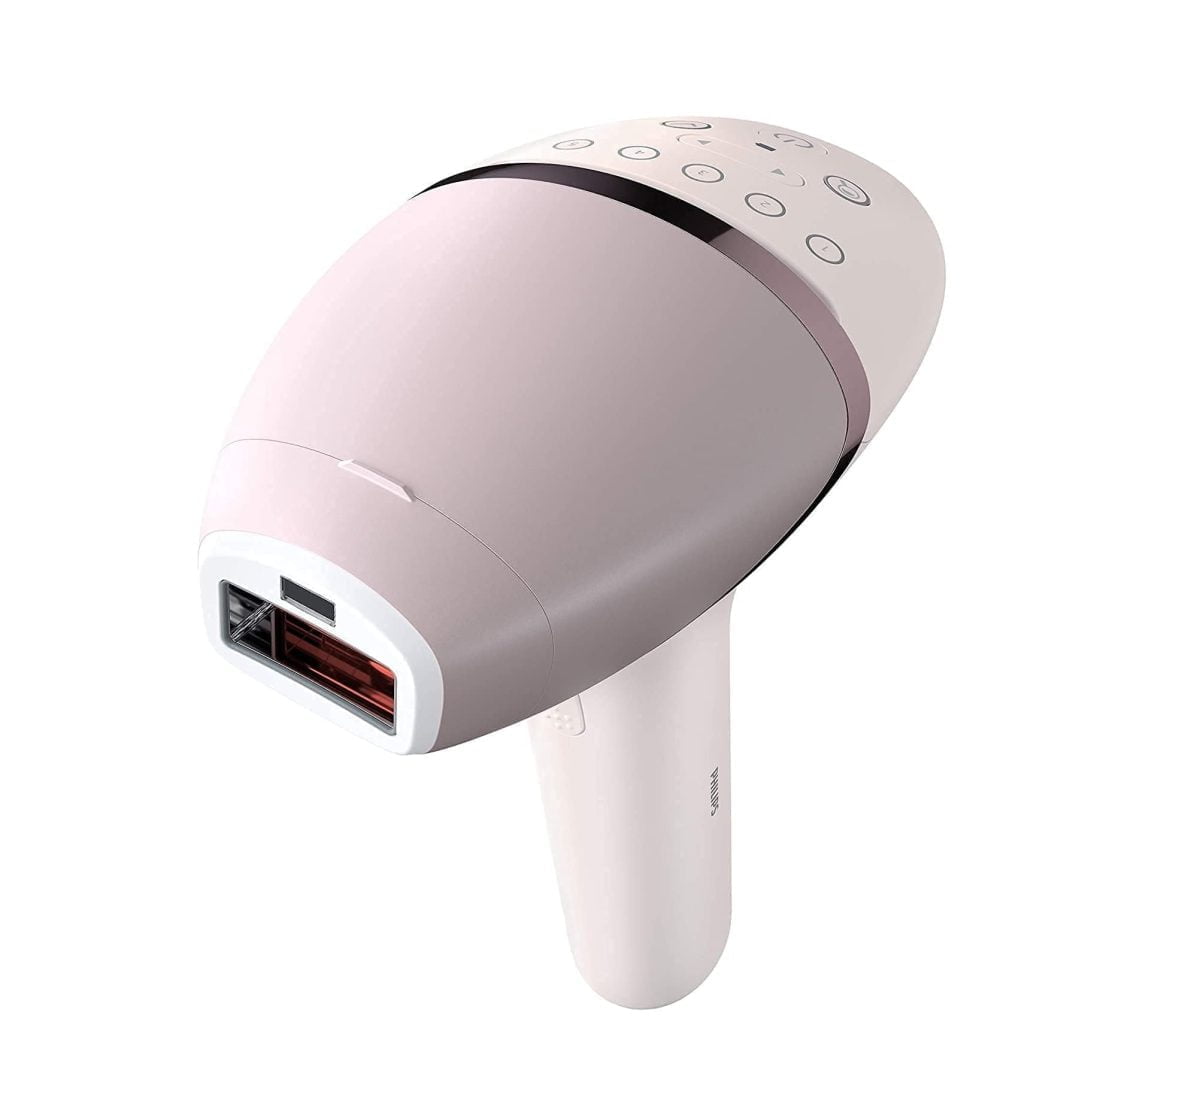 51Isc2Uwis. Ac Sl1500 Philips &Lt;H1&Gt;Philips Lumea Ipl 9000 Series Hair Removal Device With 4 Attachments For Body. Face. Bikini And Underarms. Bri957&Lt;/H1&Gt; &Lt;Ul Class=&Quot;A-Unordered-List A-Vertical A-Spacing-Mini&Quot;&Gt; &Lt;Li&Gt;&Lt;Span Class=&Quot;A-List-Item&Quot;&Gt;Ipl Technology For Home Use, Developed With Dermatologists &Lt;/Span&Gt;&Lt;/Li&Gt; &Lt;Li&Gt;&Lt;Span Class=&Quot;A-List-Item&Quot;&Gt; Proven Gentle And Effective Treatment &Lt;/Span&Gt;&Lt;/Li&Gt; &Lt;Li&Gt;&Lt;Span Class=&Quot;A-List-Item&Quot;&Gt; Senseiq Technology For Personalized Hair Removal &Lt;/Span&Gt;&Lt;/Li&Gt; &Lt;Li&Gt;&Lt;Span Class=&Quot;A-List-Item&Quot;&Gt; 450,000 Flashes In Total &Lt;/Span&Gt;&Lt;/Li&Gt; &Lt;Li&Gt;&Lt;Span Class=&Quot;A-List-Item&Quot;&Gt; Bikini Area Attachment With Extra Light Filter&Lt;/Span&Gt;&Lt;/Li&Gt; &Lt;/Ul&Gt; &Lt;Pre&Gt;One Year Warranty&Lt;/Pre&Gt; Hair Removal Philips Lumea Ipl 9000 Series Hair Removal Device With 4 Attachments - Bri957